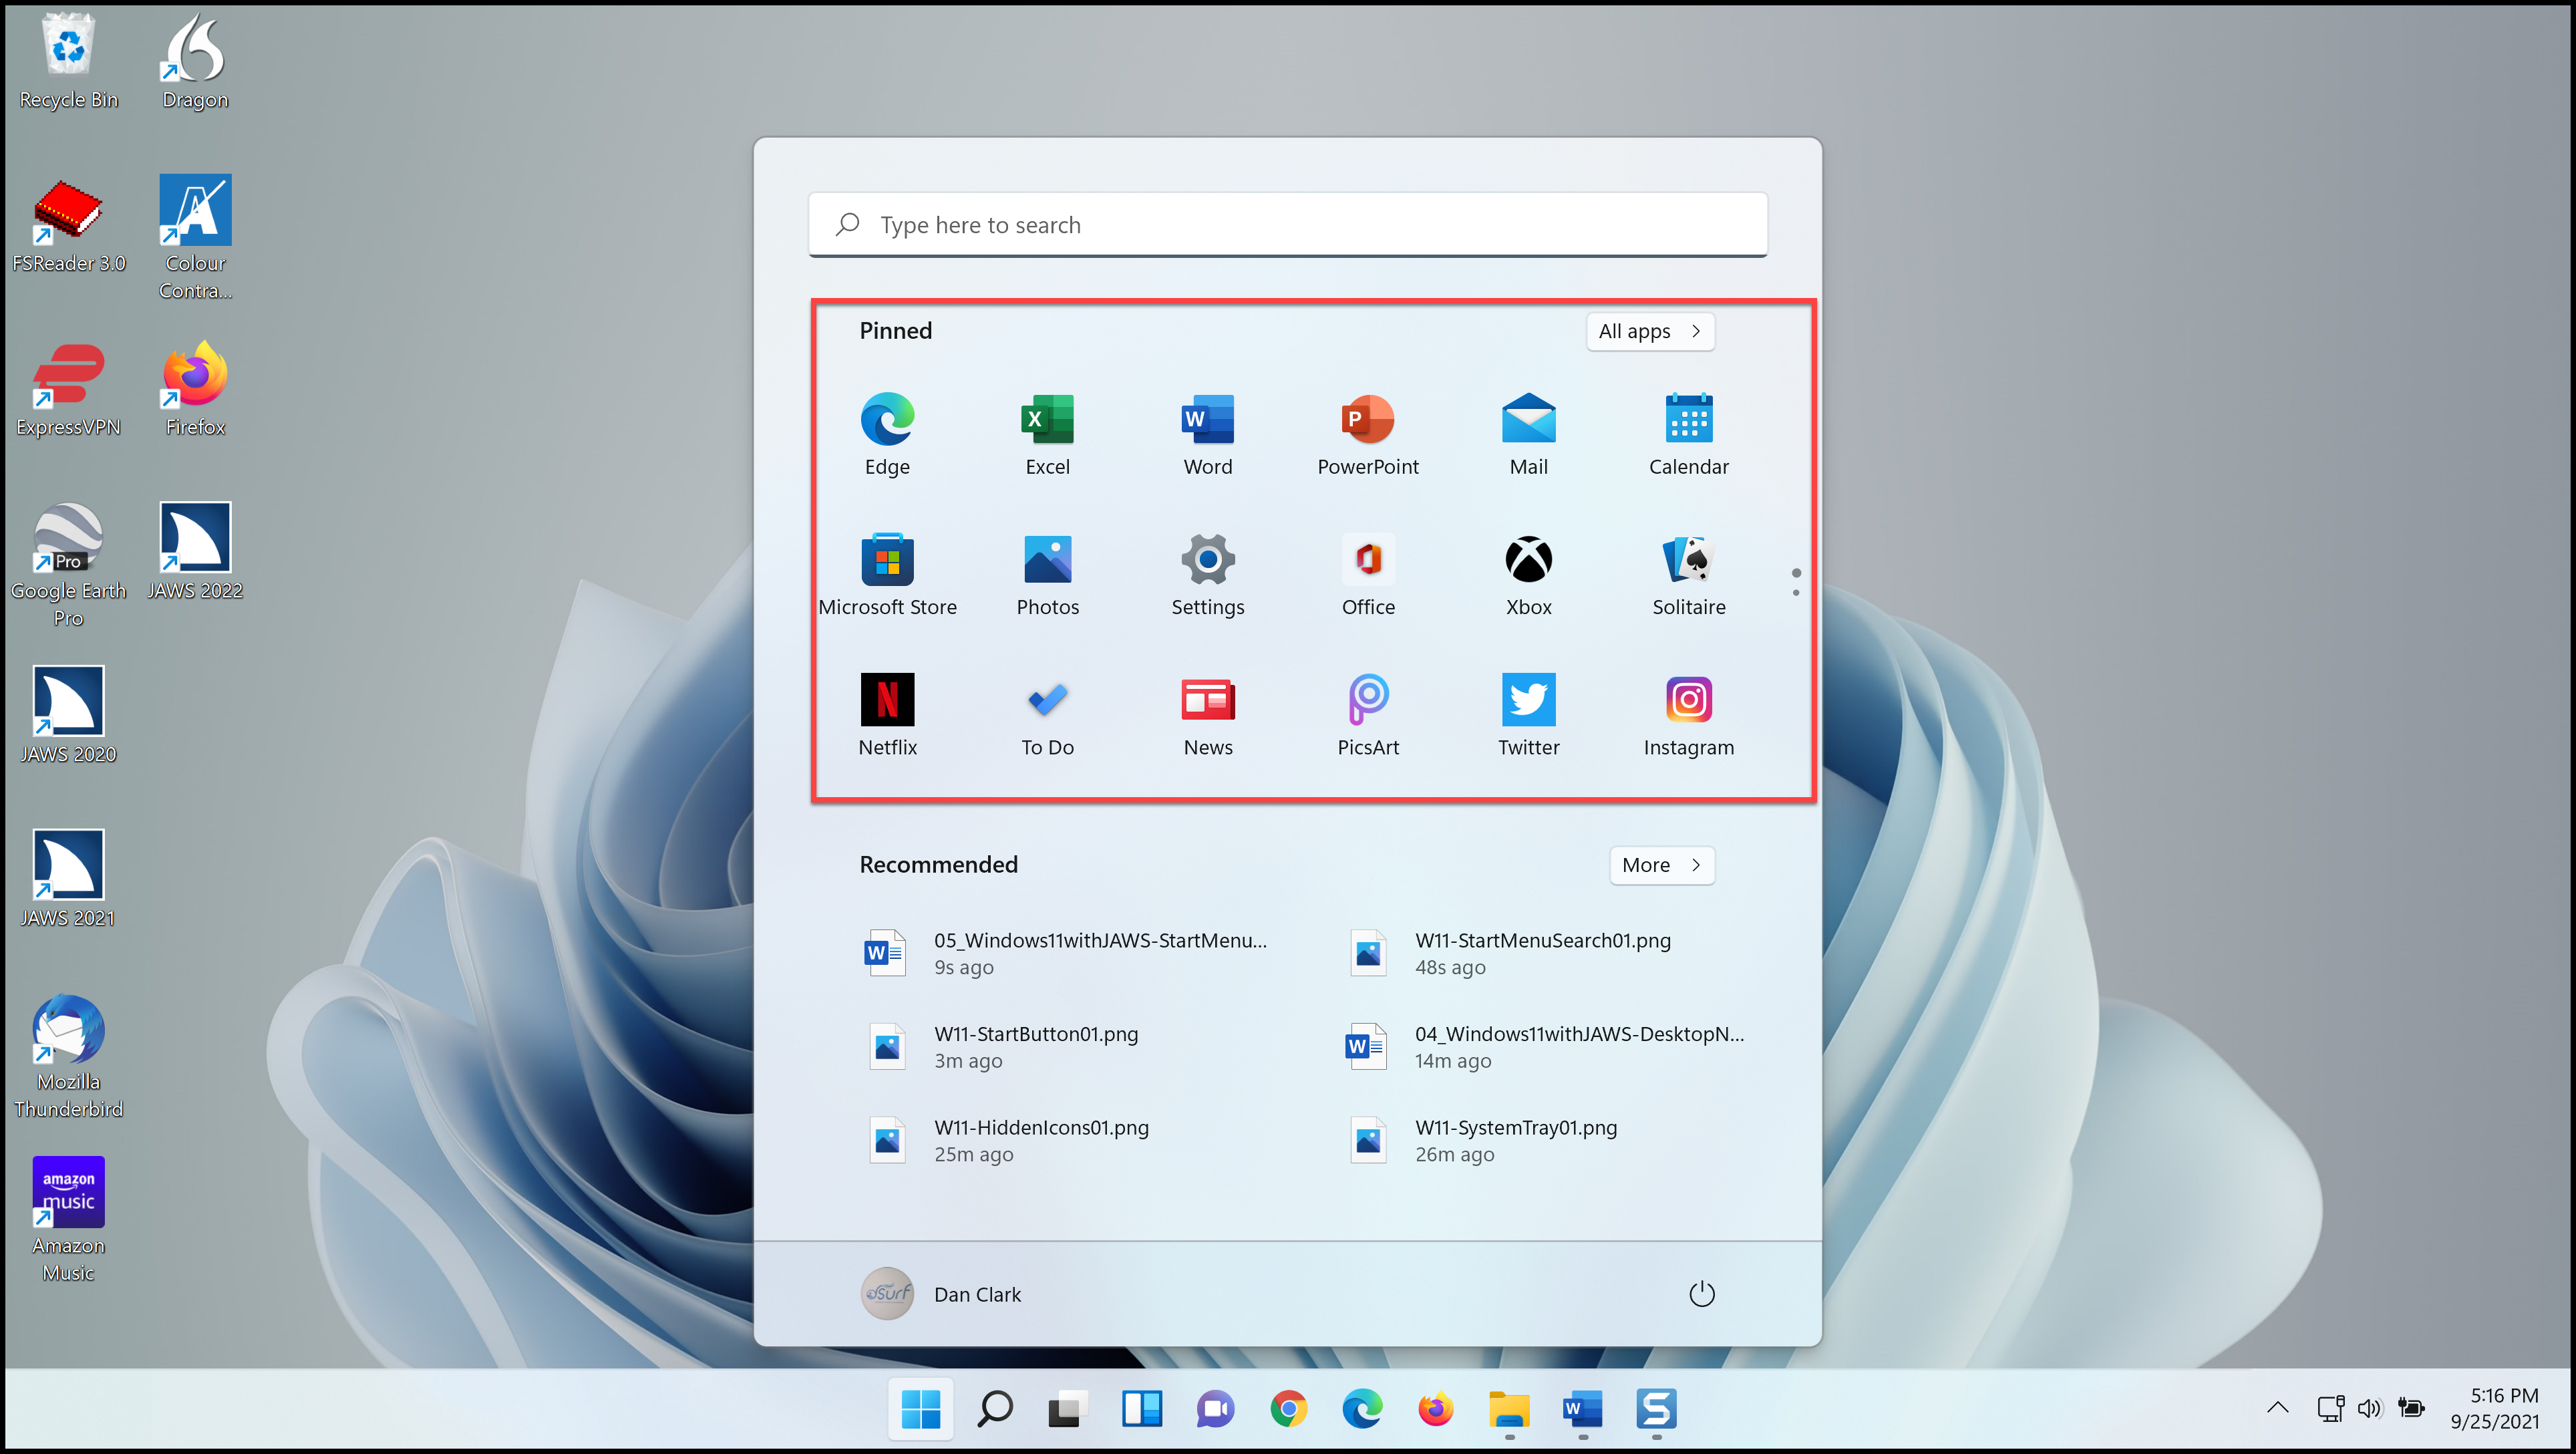 The Pinned apps section of the Start menu in Windows 11.